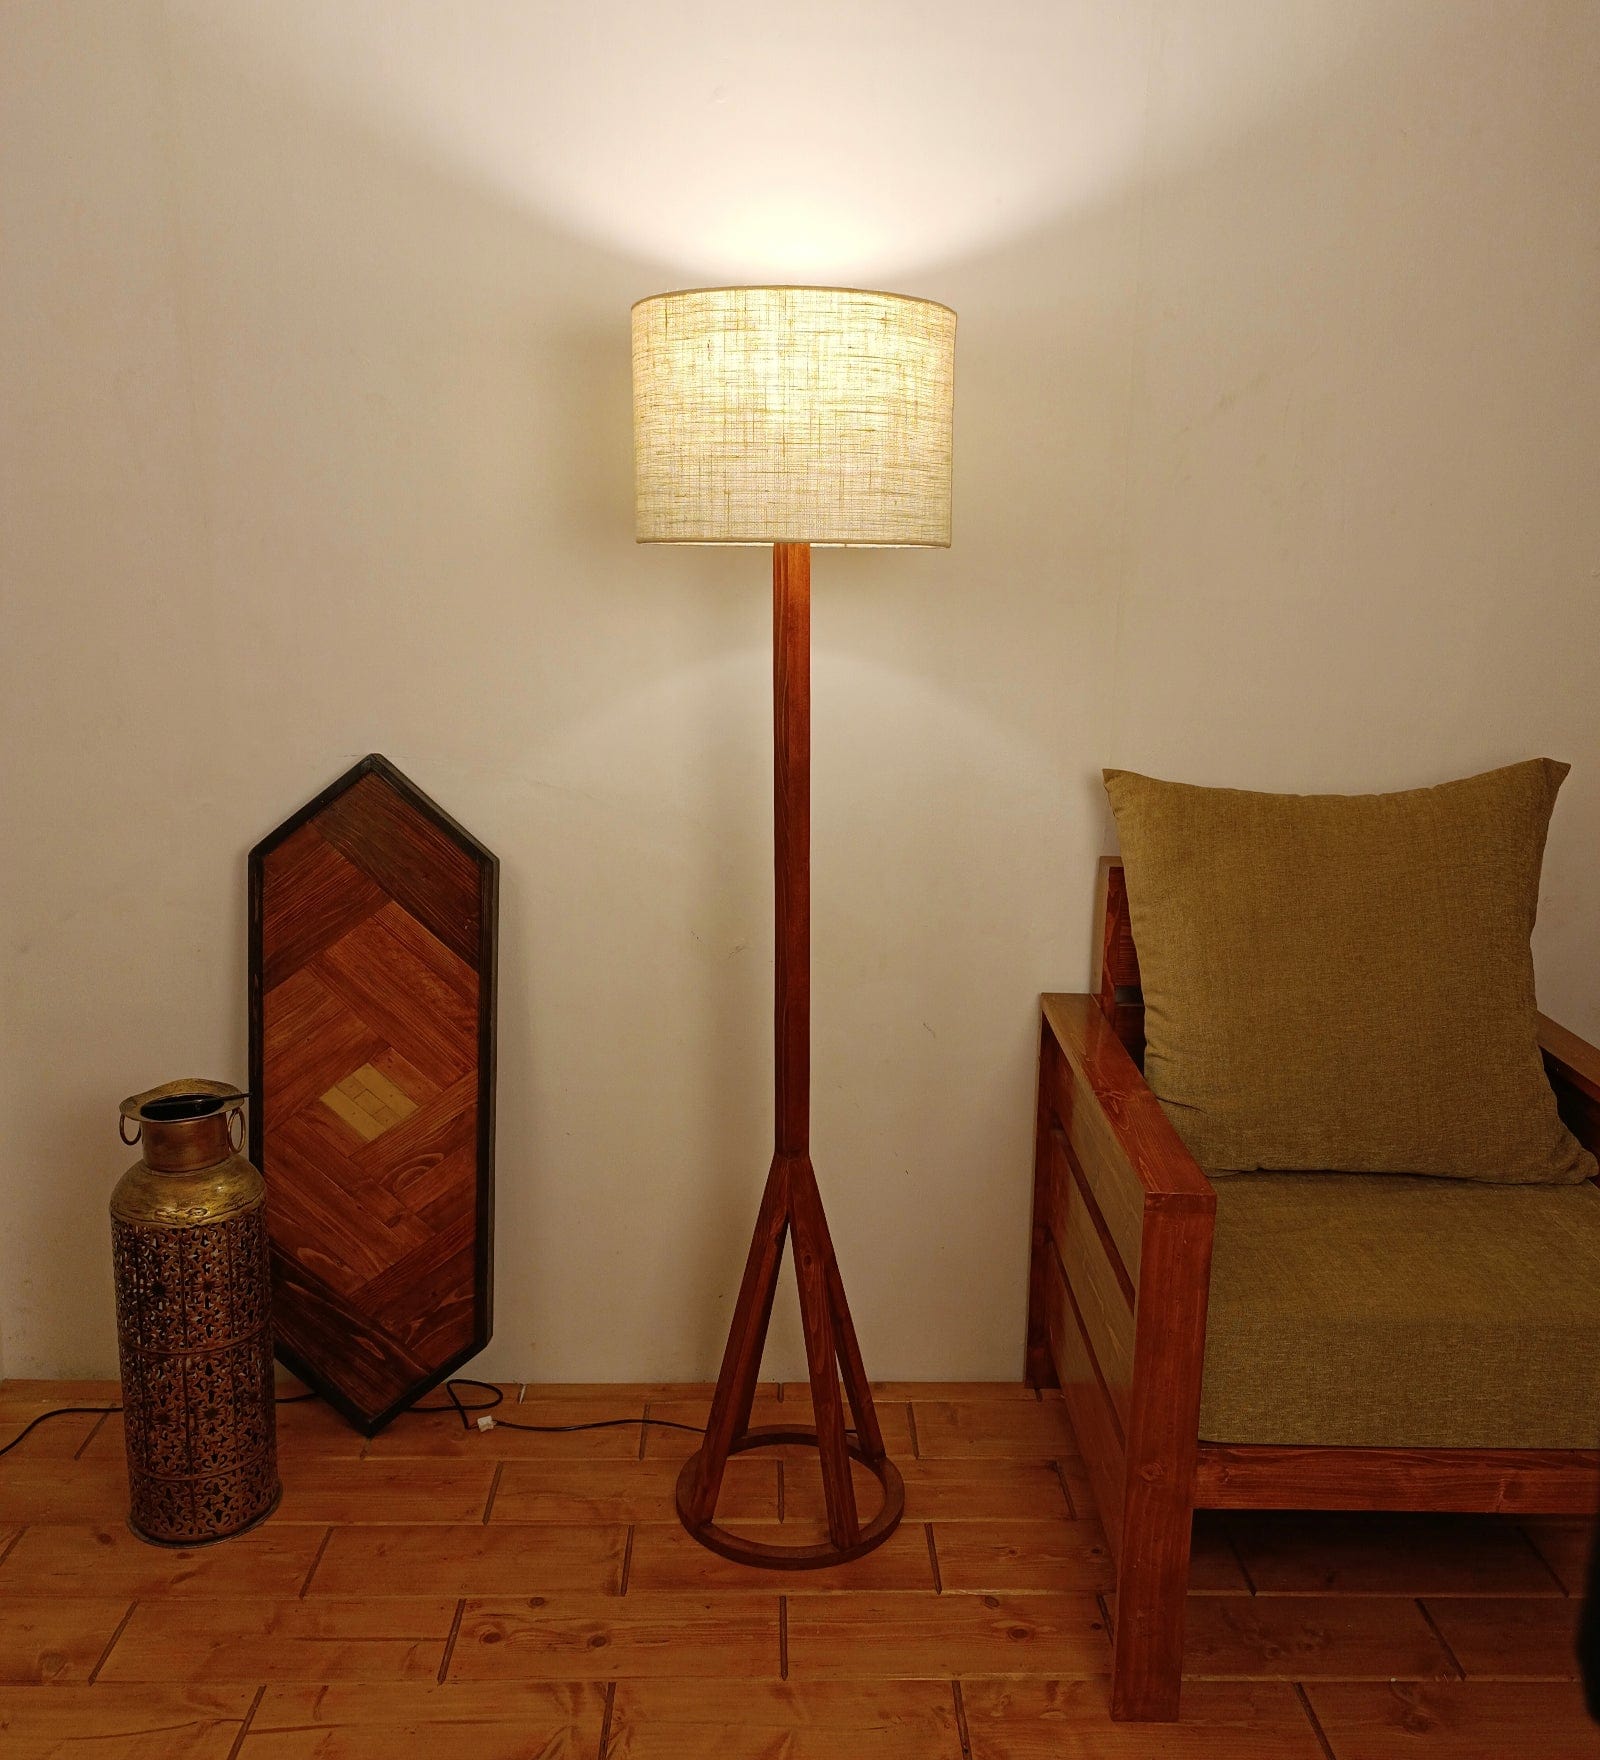 Celine Wooden Floor Lamp with Brown Base and Premium Beige Fabric Lampshade (BULB NOT INCLUDED)